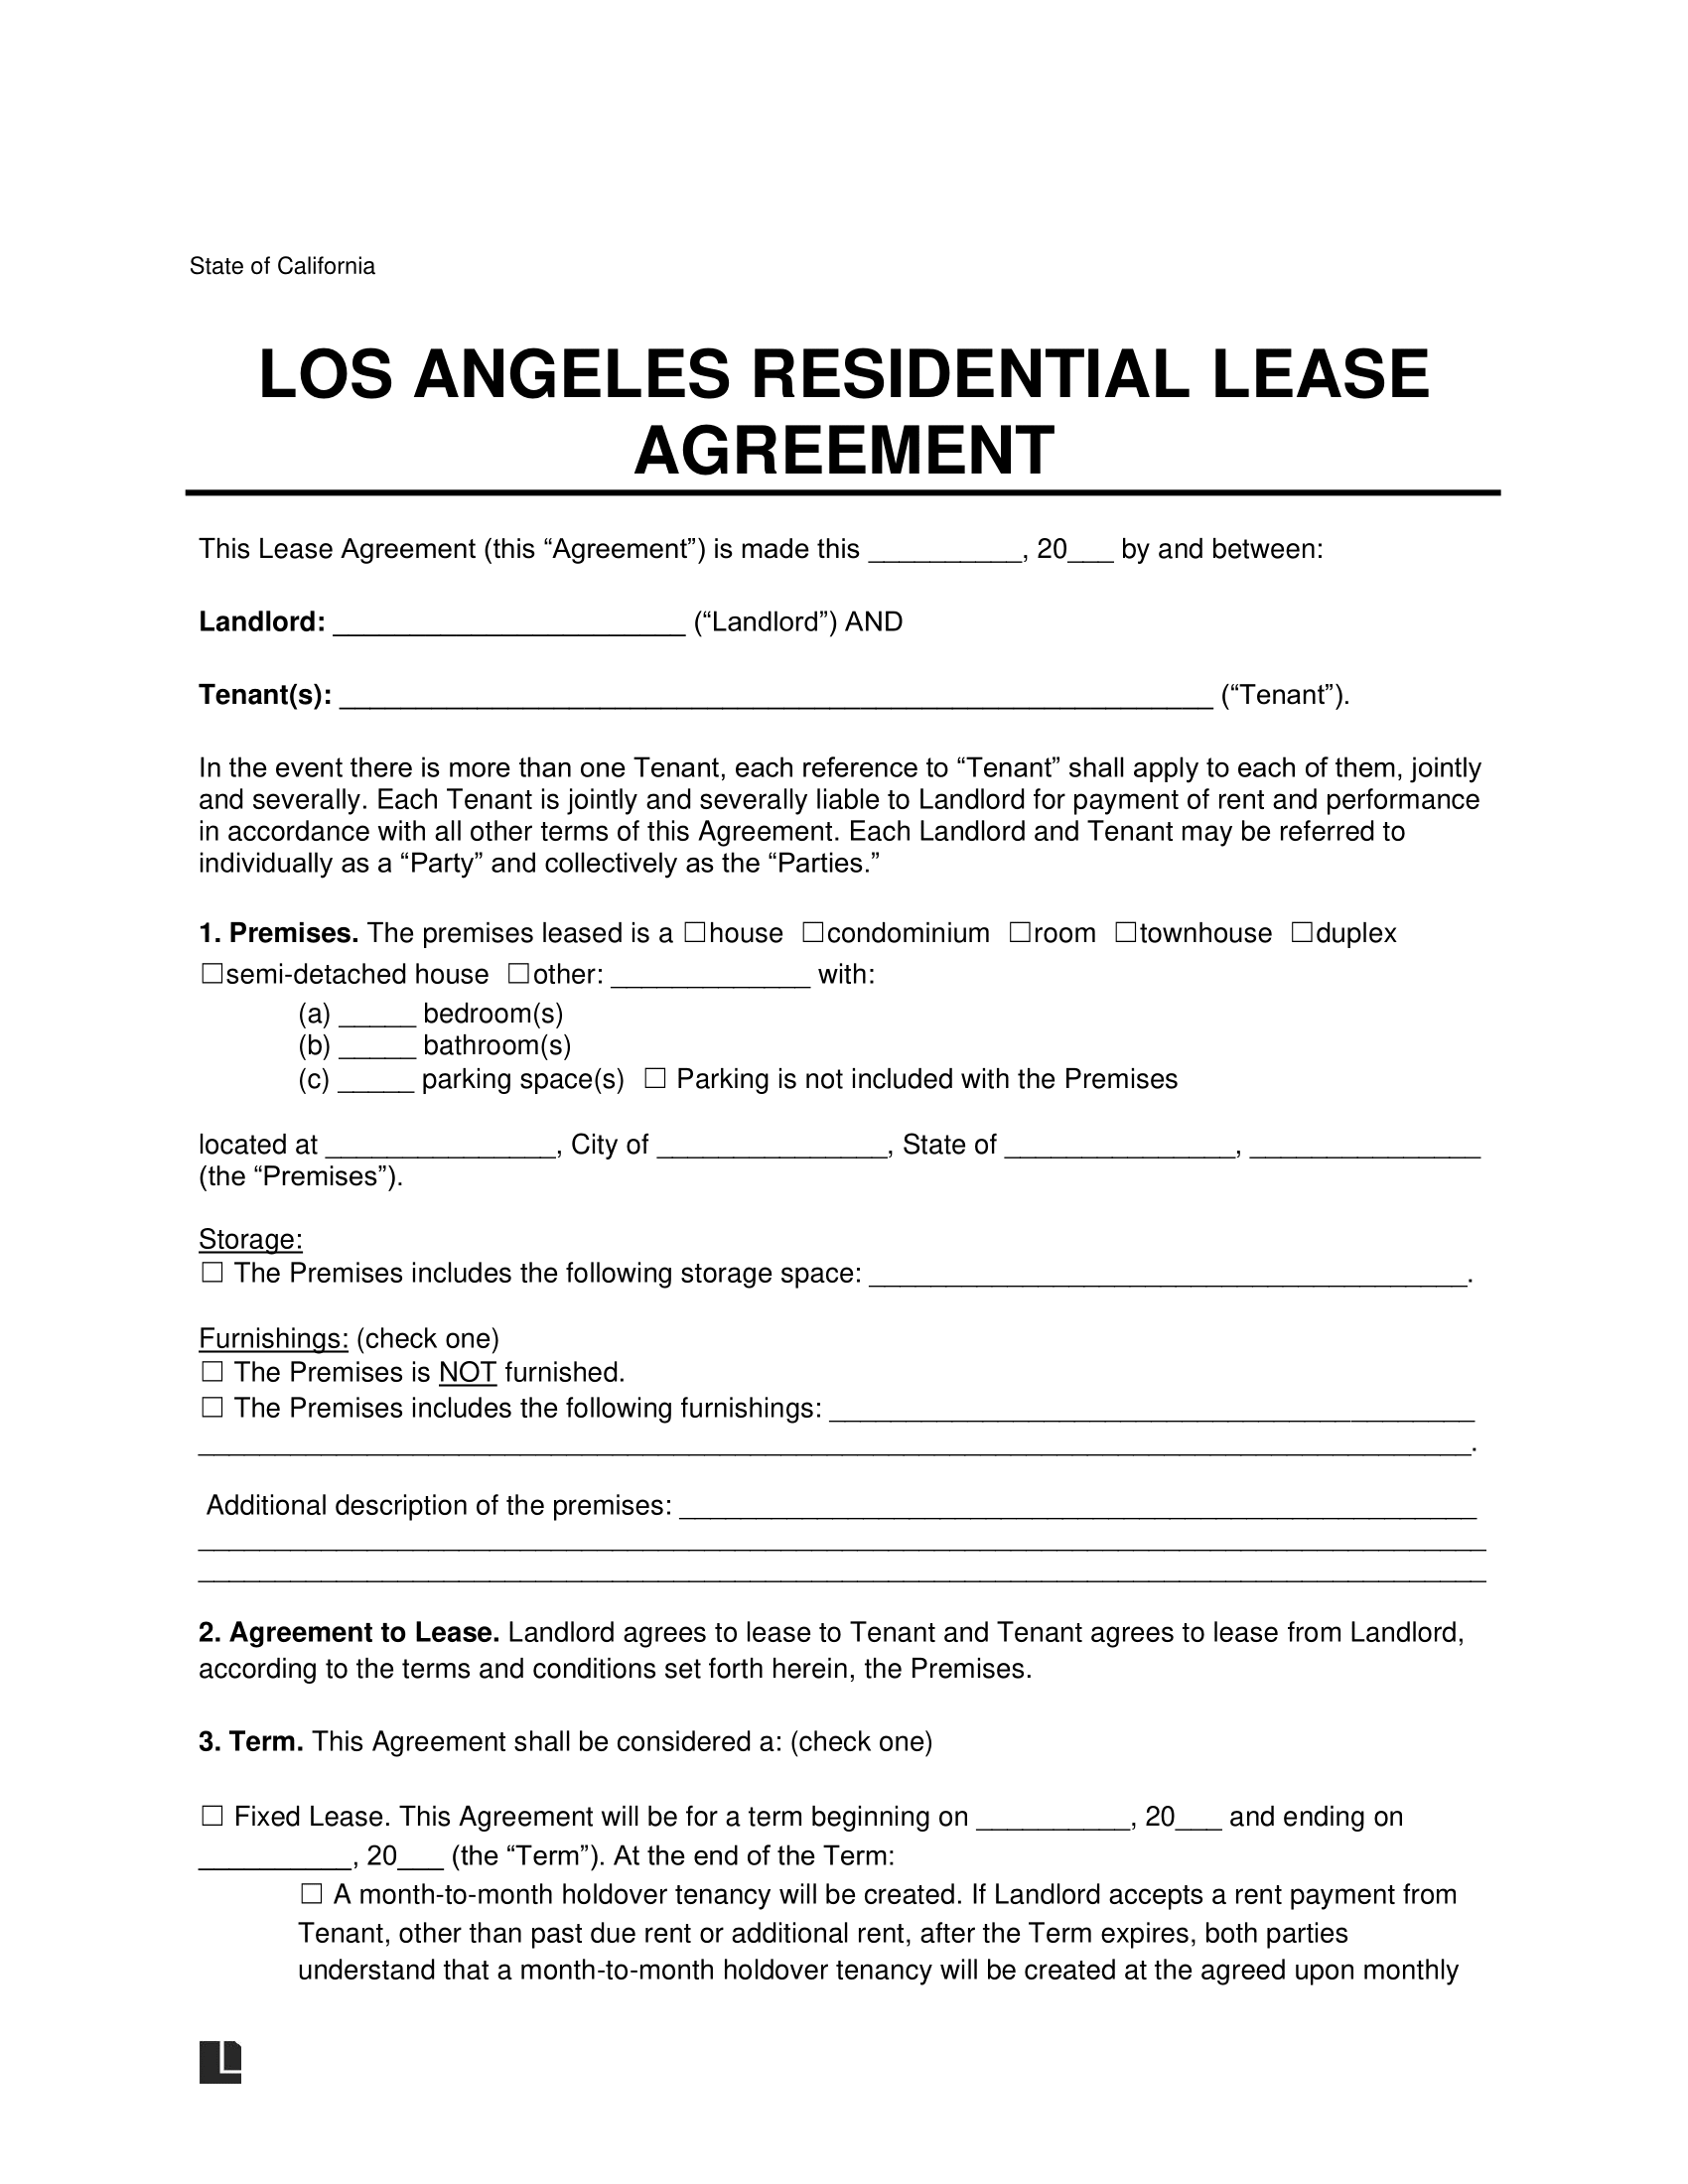 Los Angeles Residential Lease Agreement Template